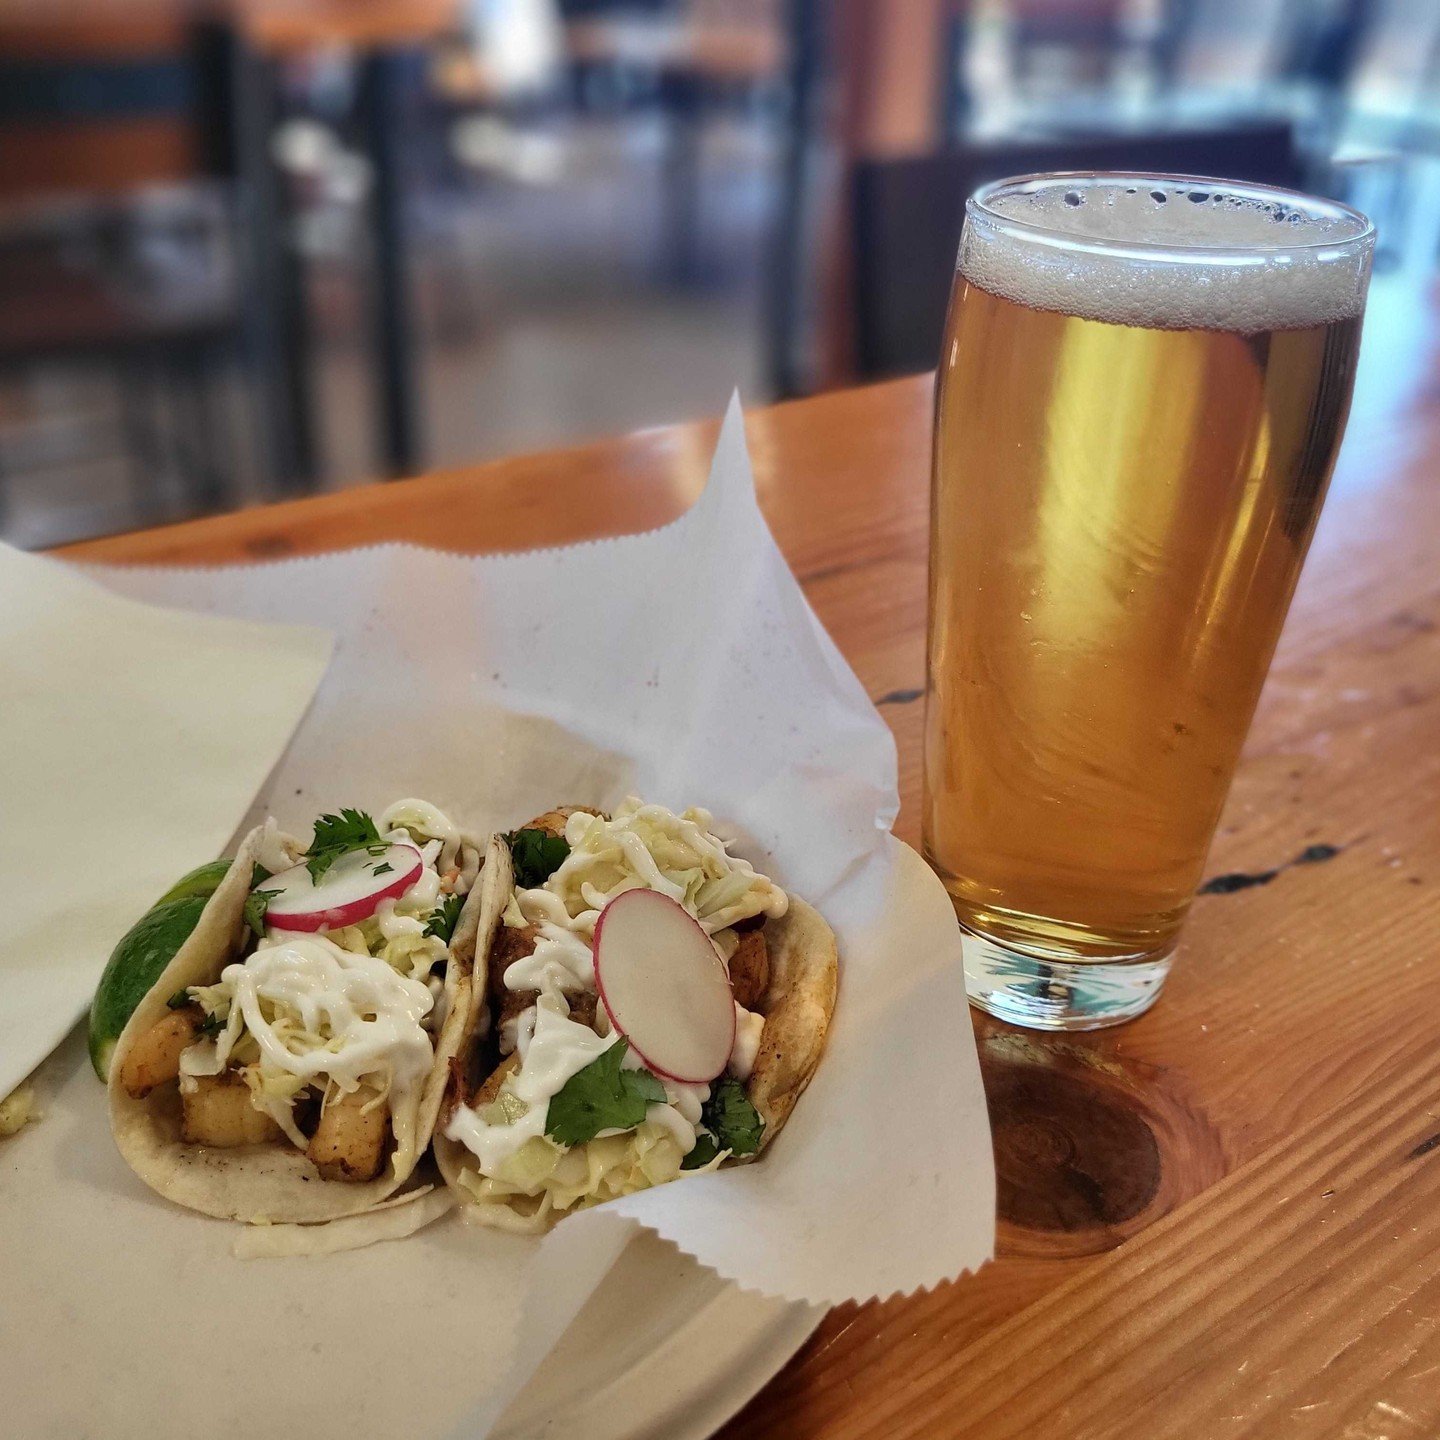 Taco Tuesday with @los_tacos_in_your_belly is upon us once more! I hear our Shifty Especial Mexican Lager pairs perfectly with some shrimp tacos.